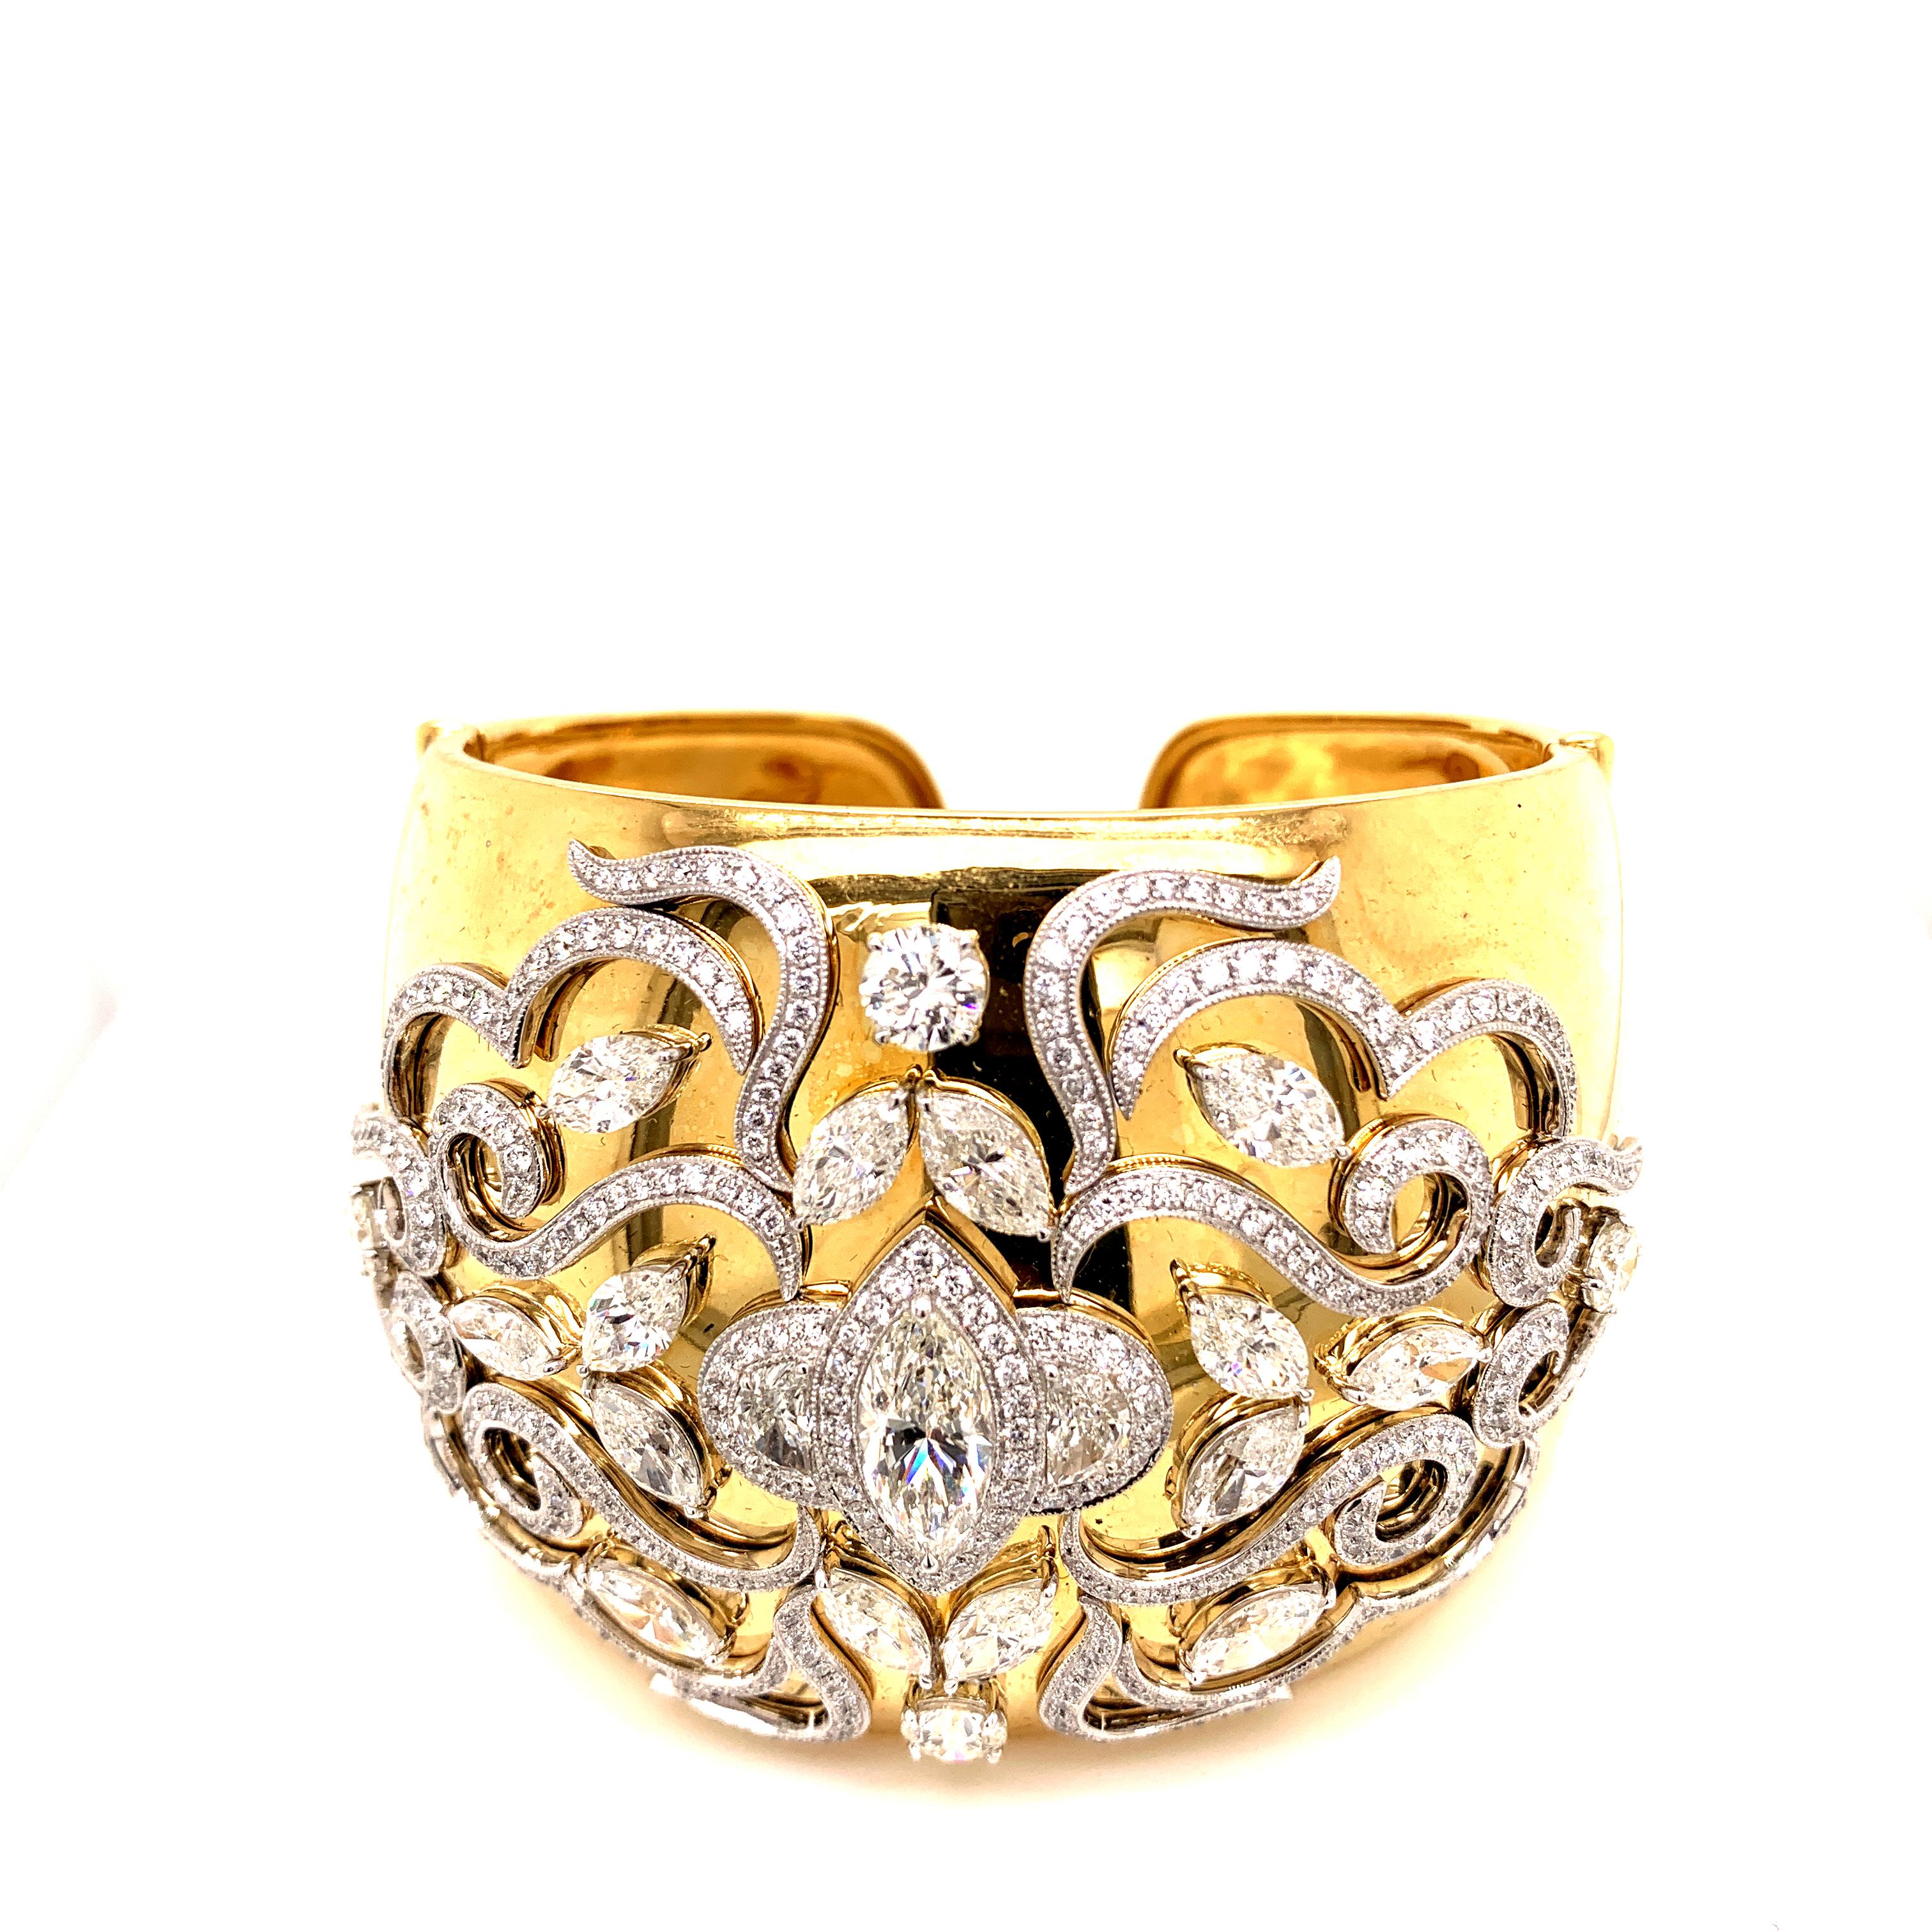 Sophia D. 16.53 Carat Diamond Bangle Set in Yellow Gold In New Condition For Sale In New York, NY